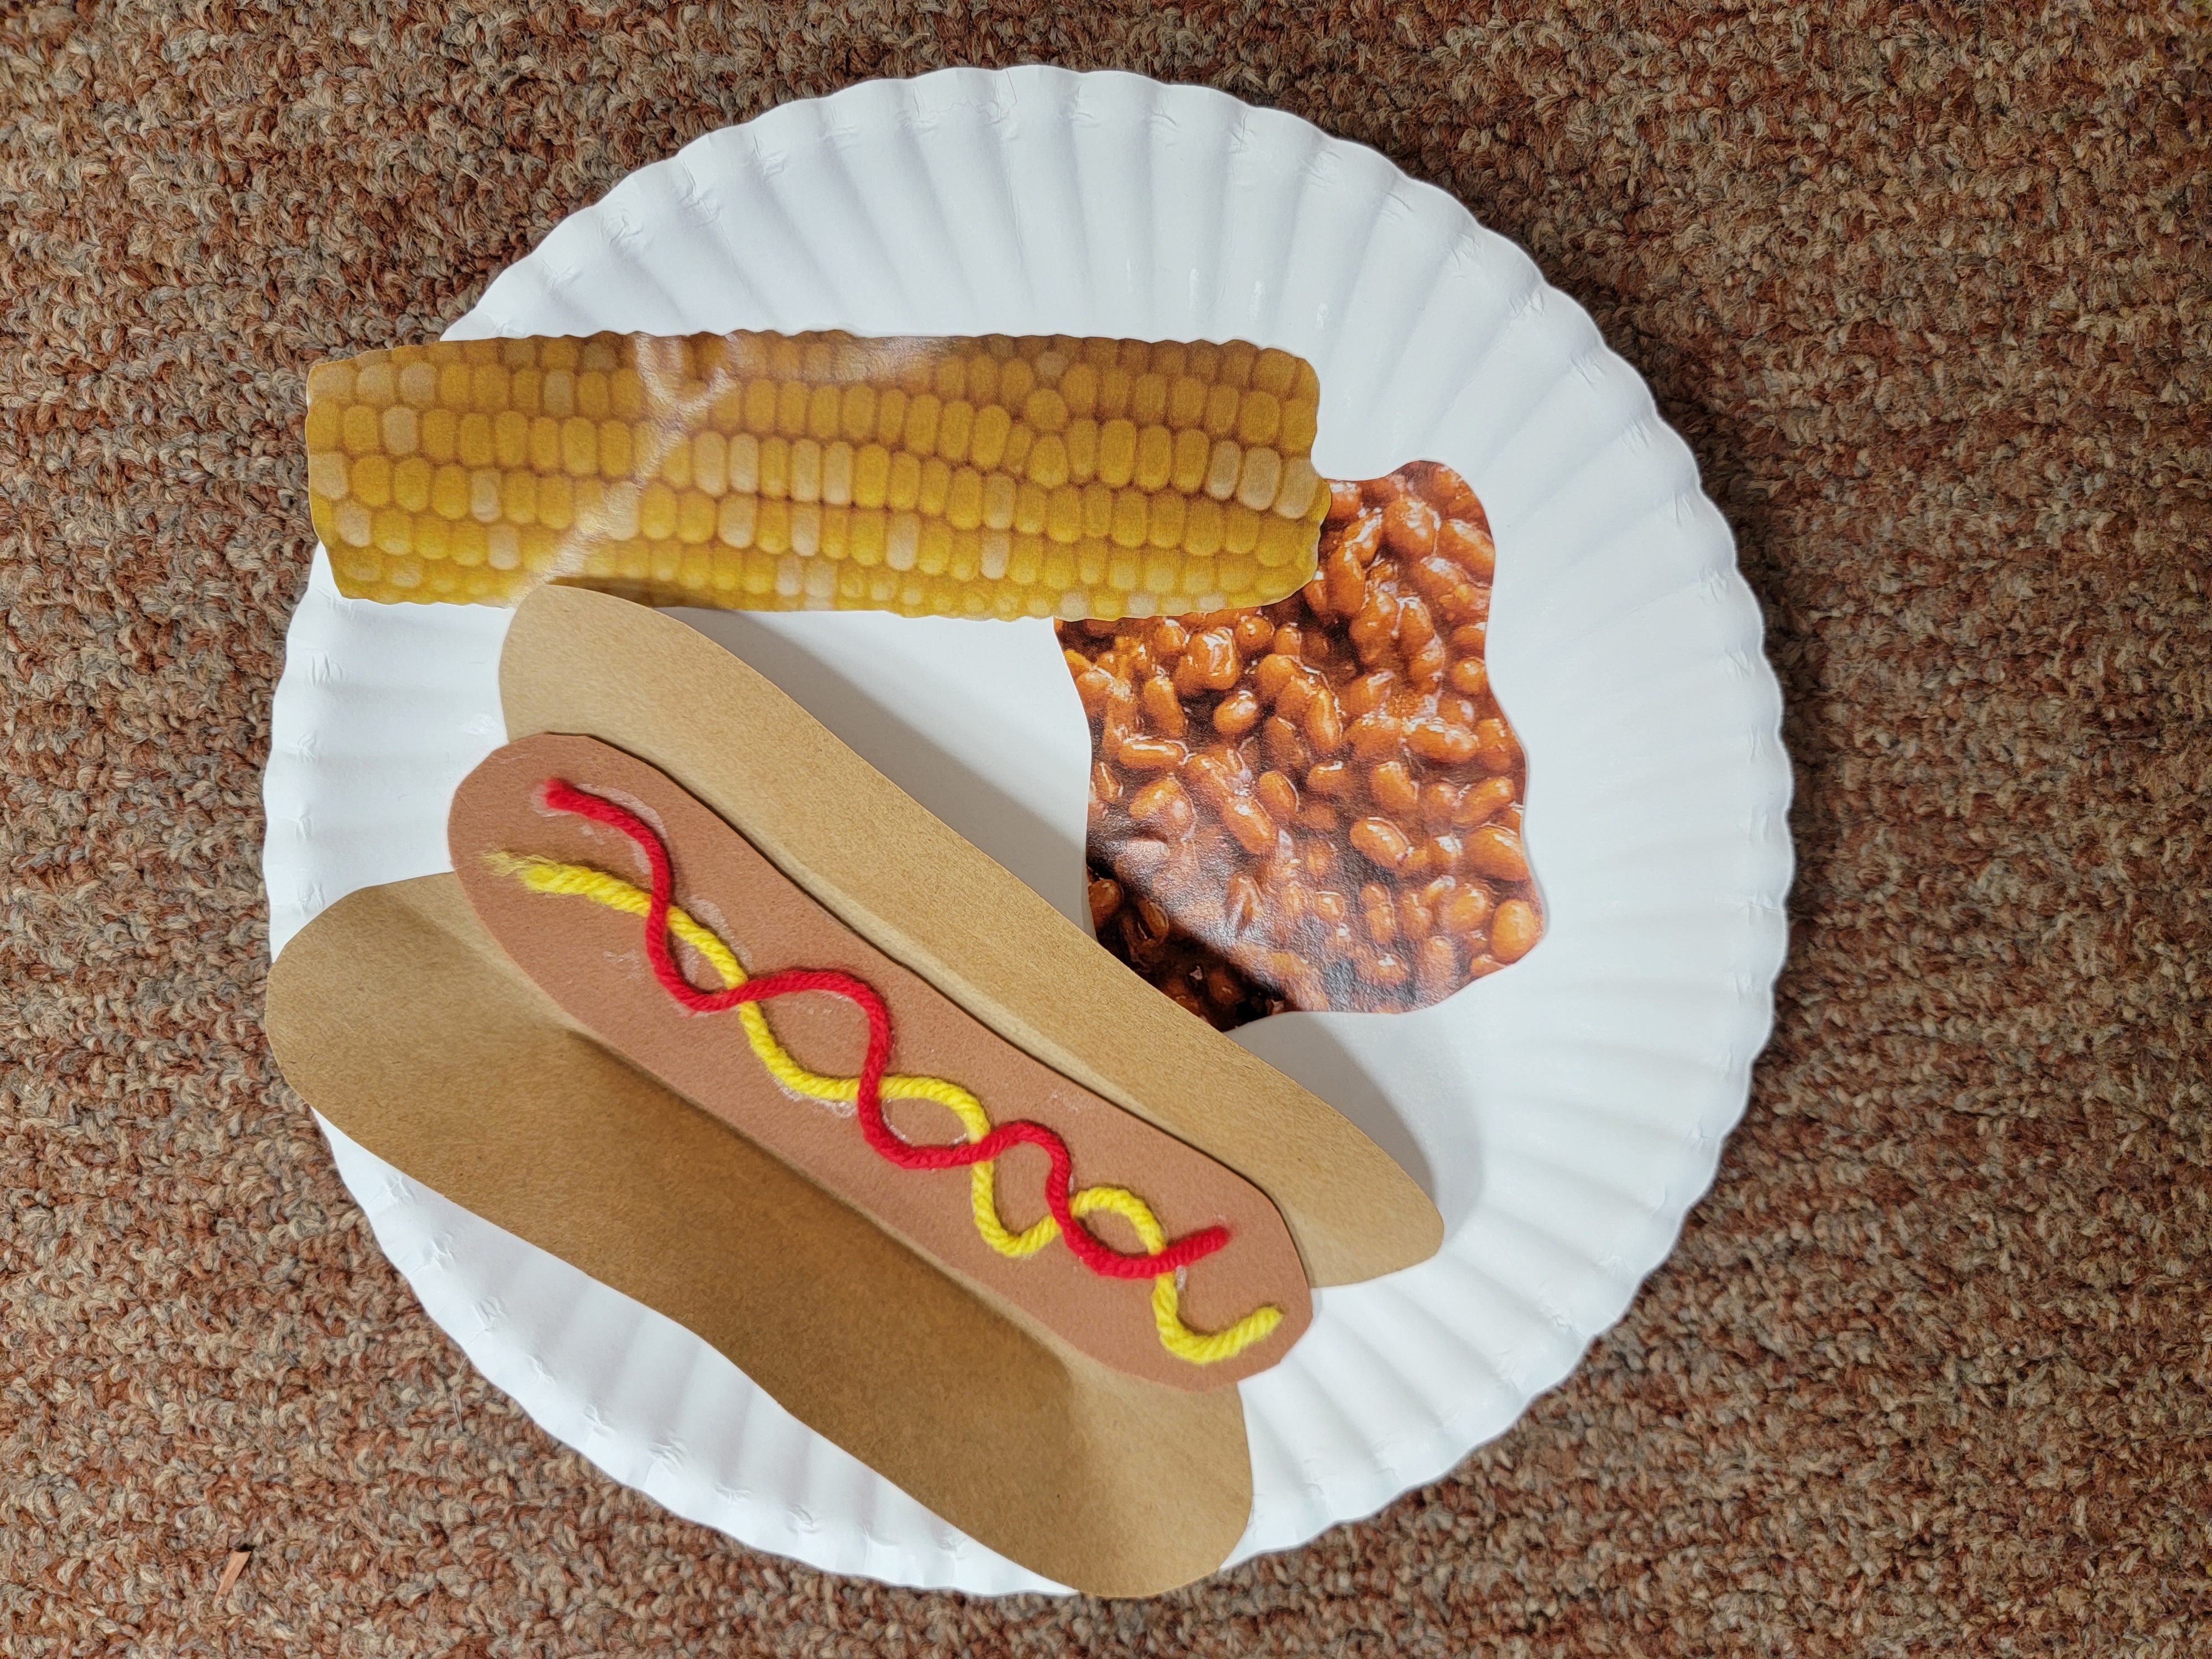 Hot dog, corn on the cob and beans on a plate 